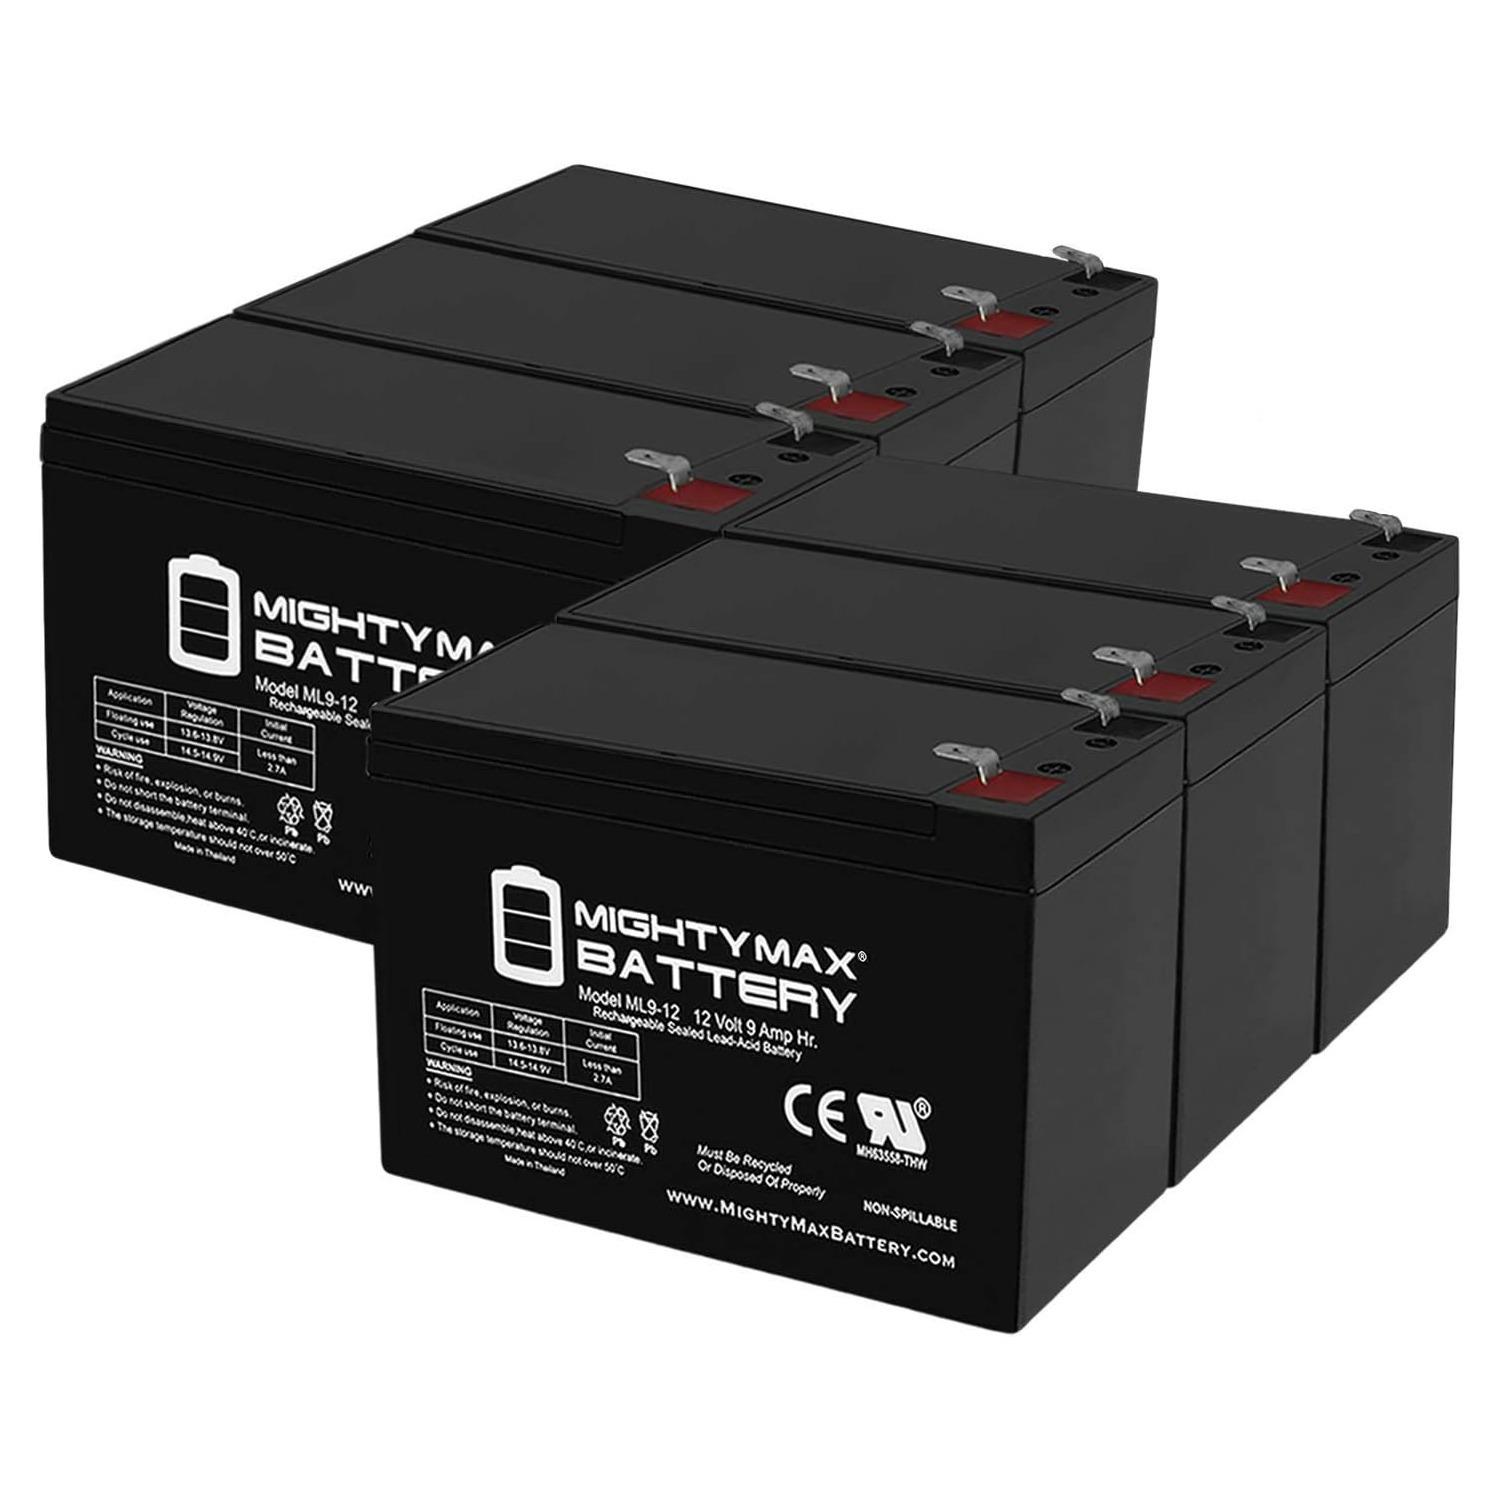 Altronix SMP3PMCTXPD16 12V, 9Ah Lead Acid Battery - 6 Pack